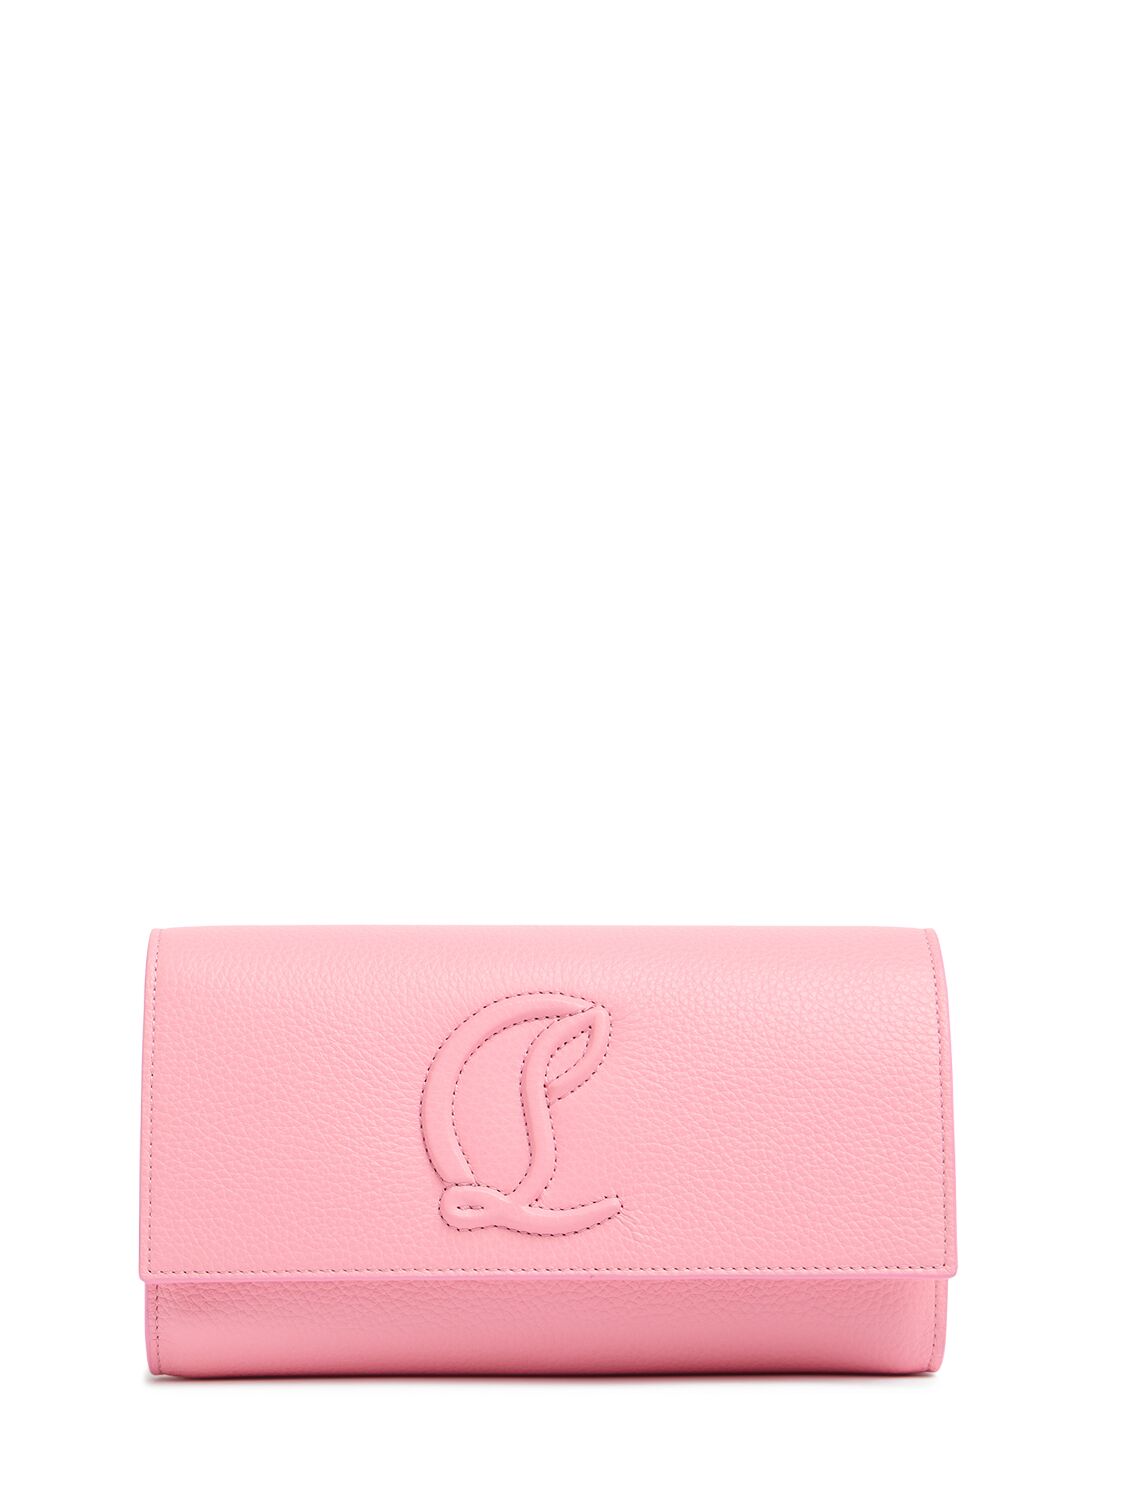 Christian Louboutin By My Side Leather Wallet W/ Chain In Pink